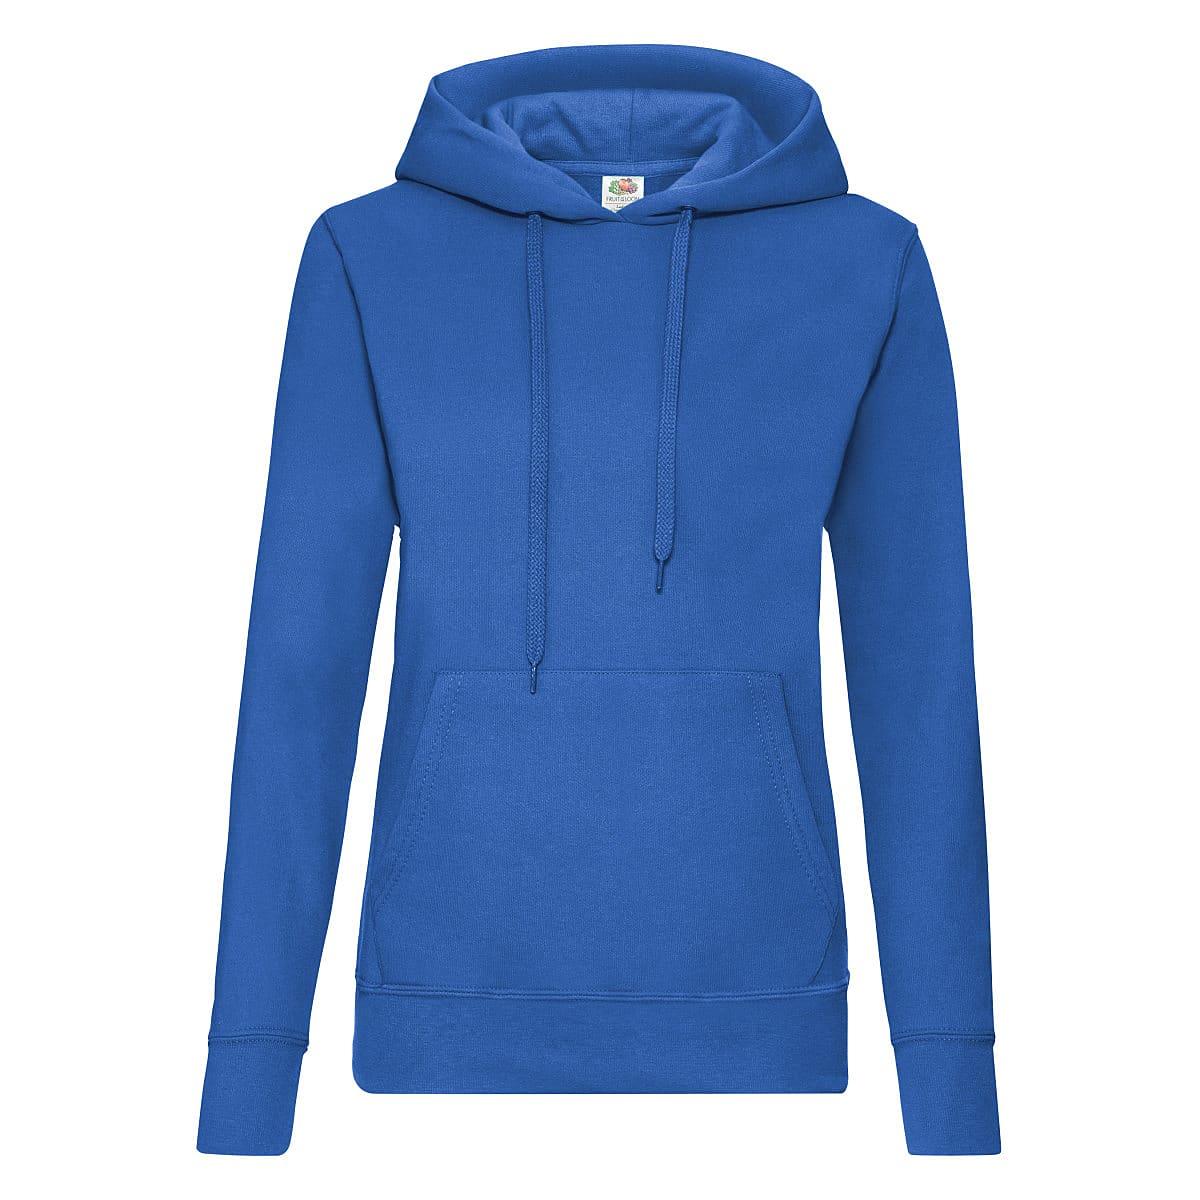 Fruit Of The Loom Lady-Fit Classic Hoodie in Royal Blue (Product Code: 62038)